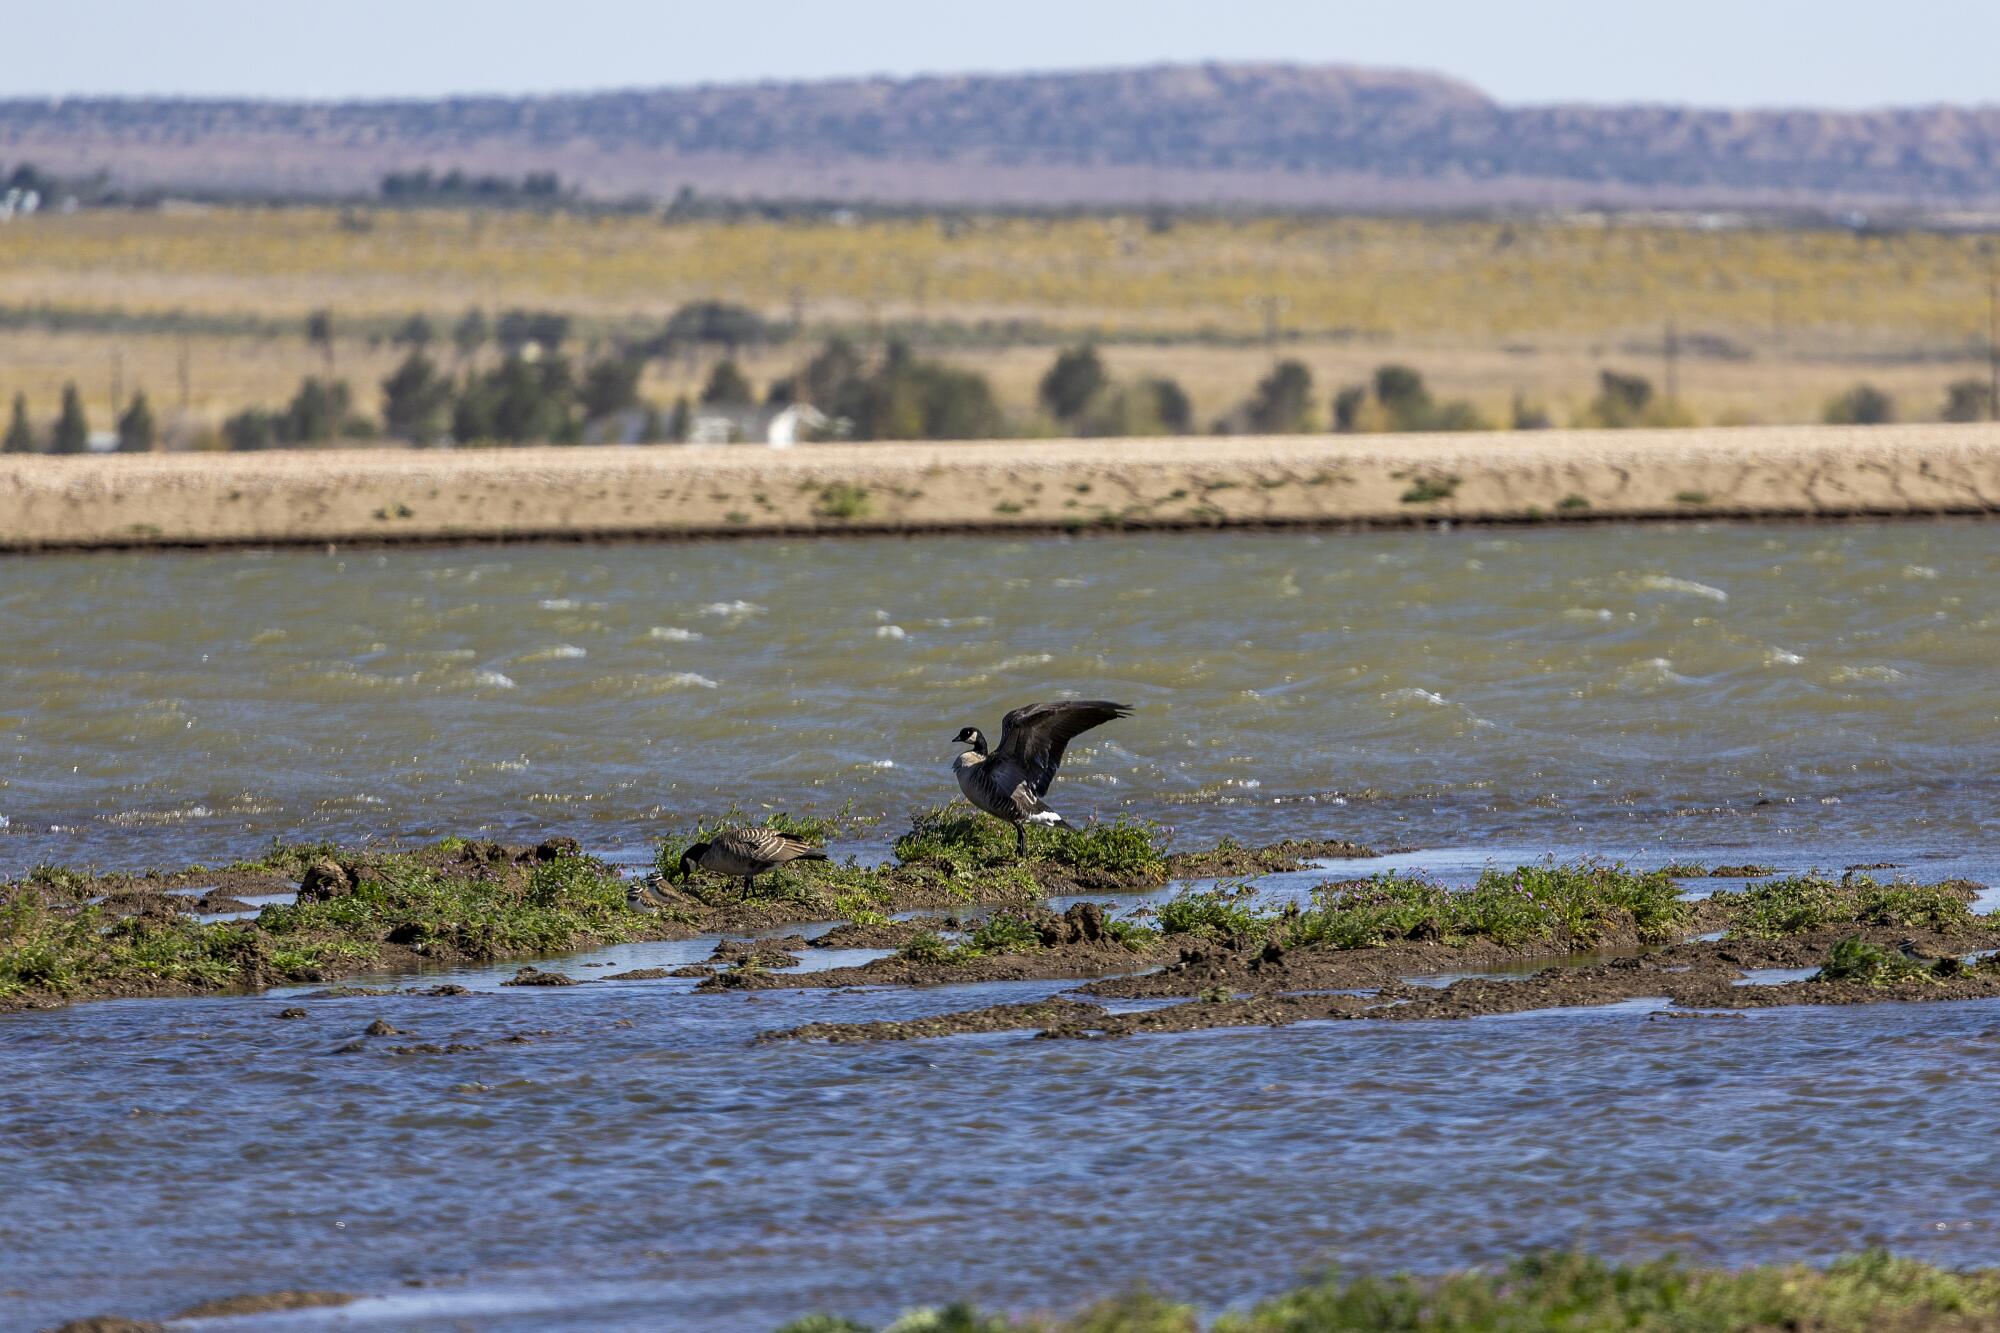 Birds gather on a patch of land amid a body water, with a desert landscape in the background